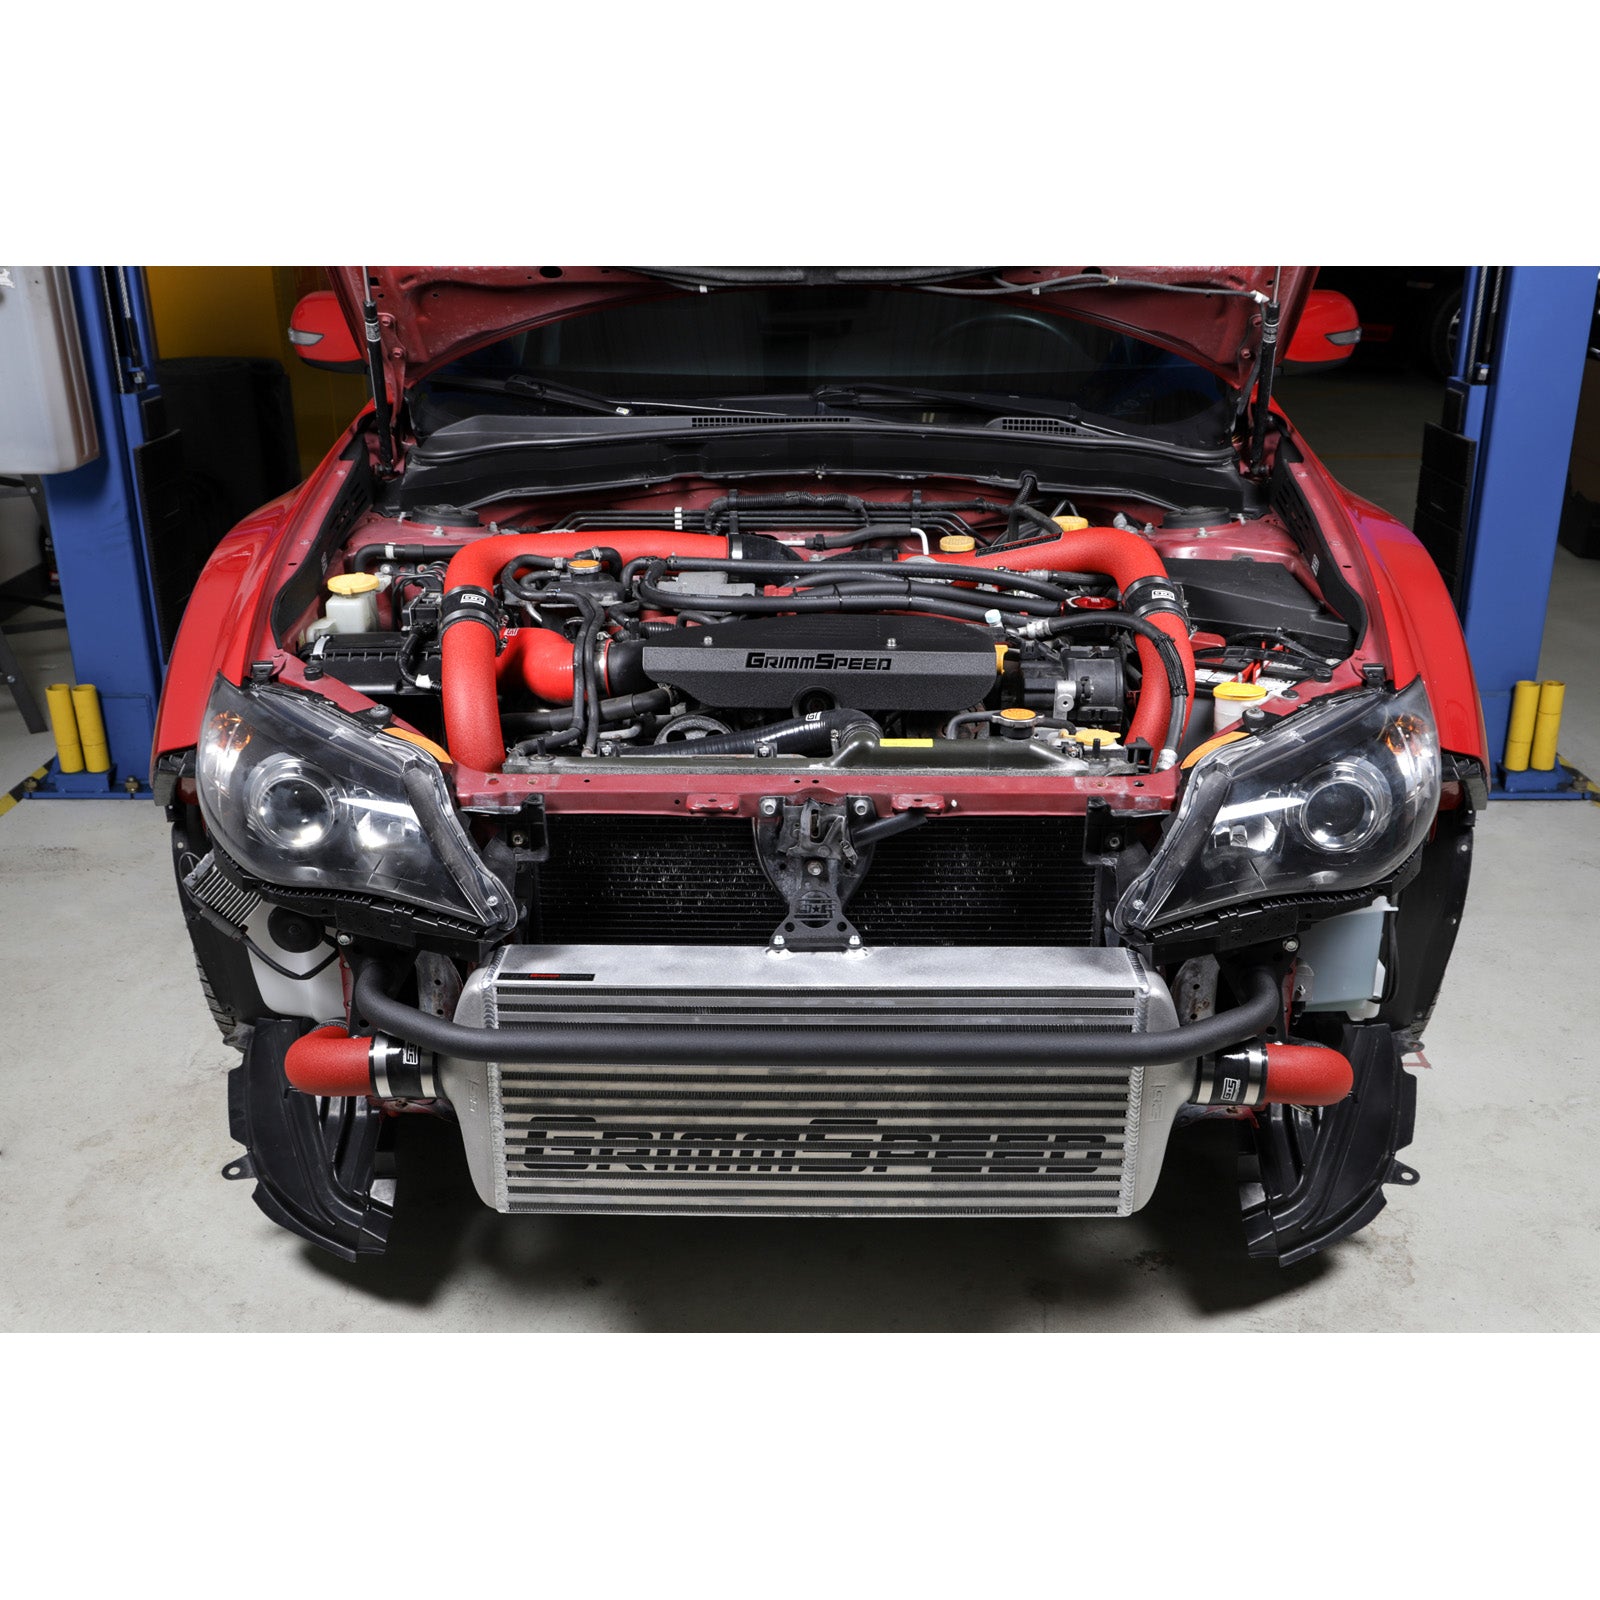 GrimmSpeed Front Mount Intercooler Kit - Raw Core with Red Piping - 2008-14 Subaru STI - 0